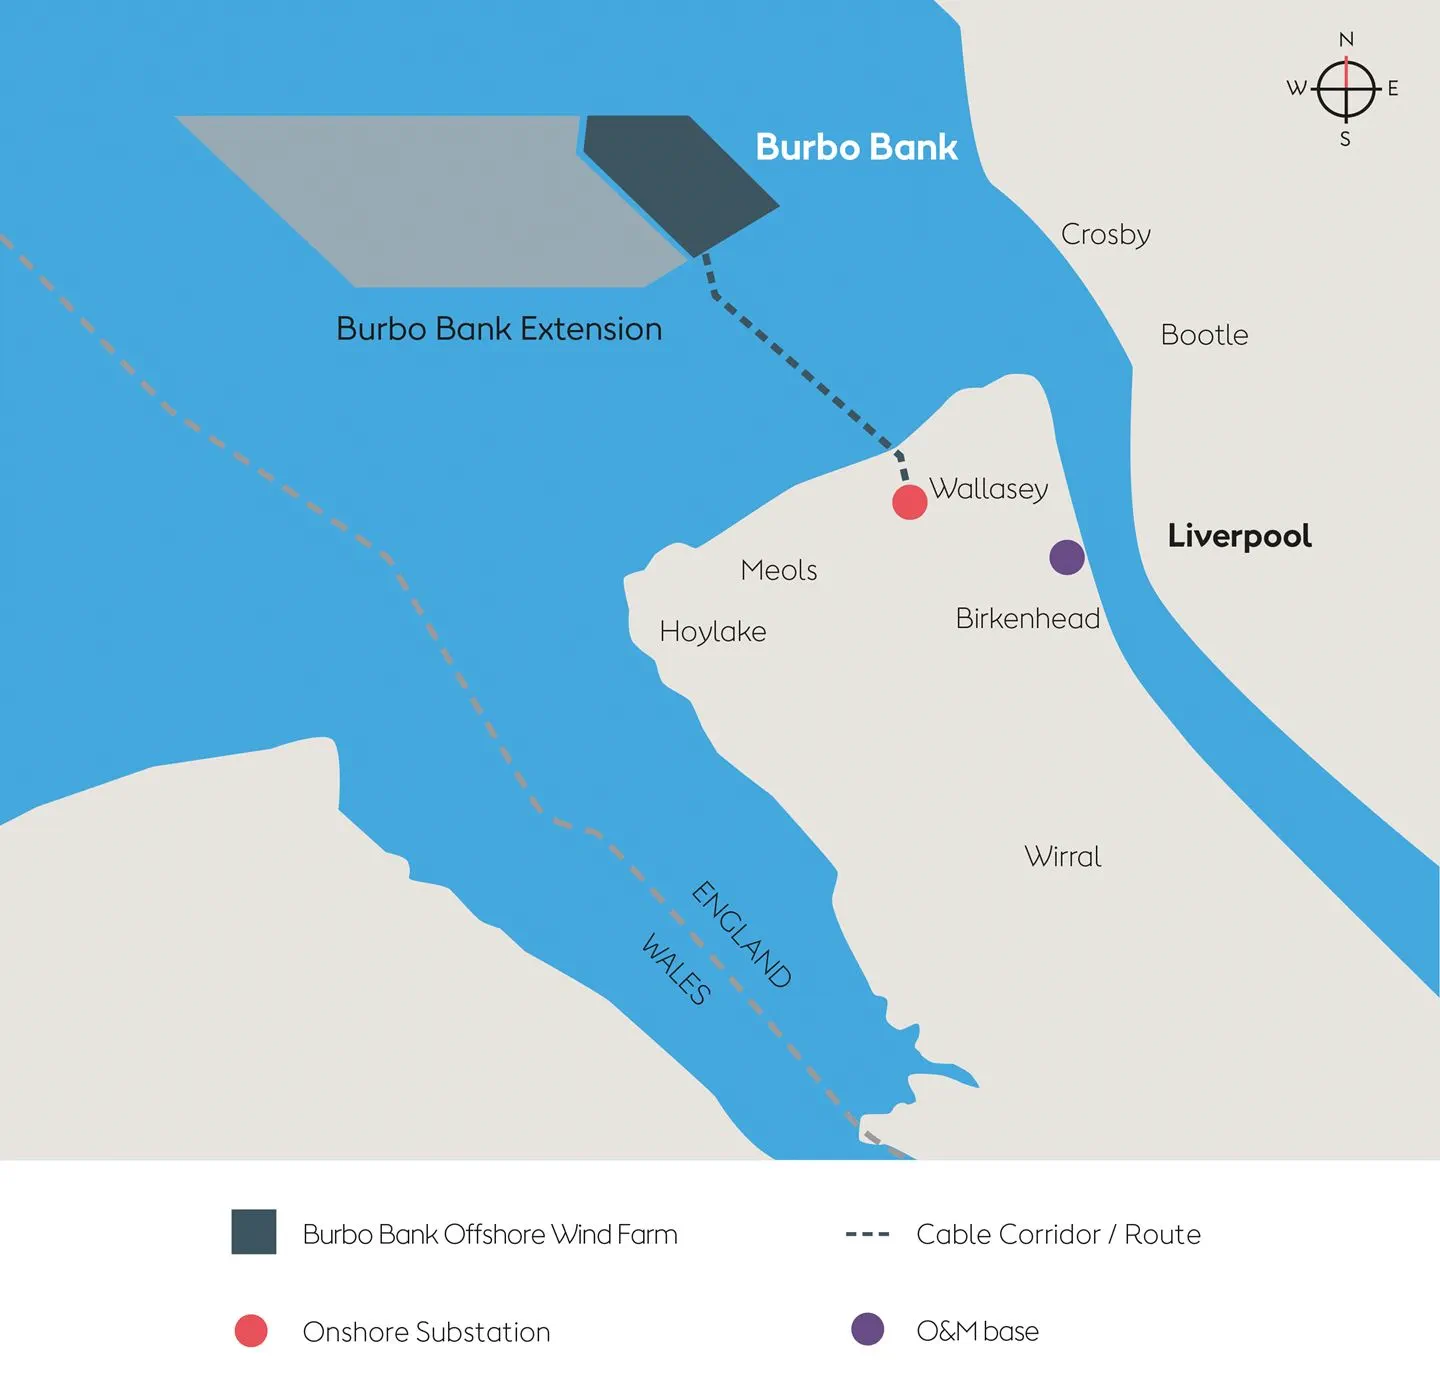 Map showing the location of Burbo Bank Offshore Wind Farm.